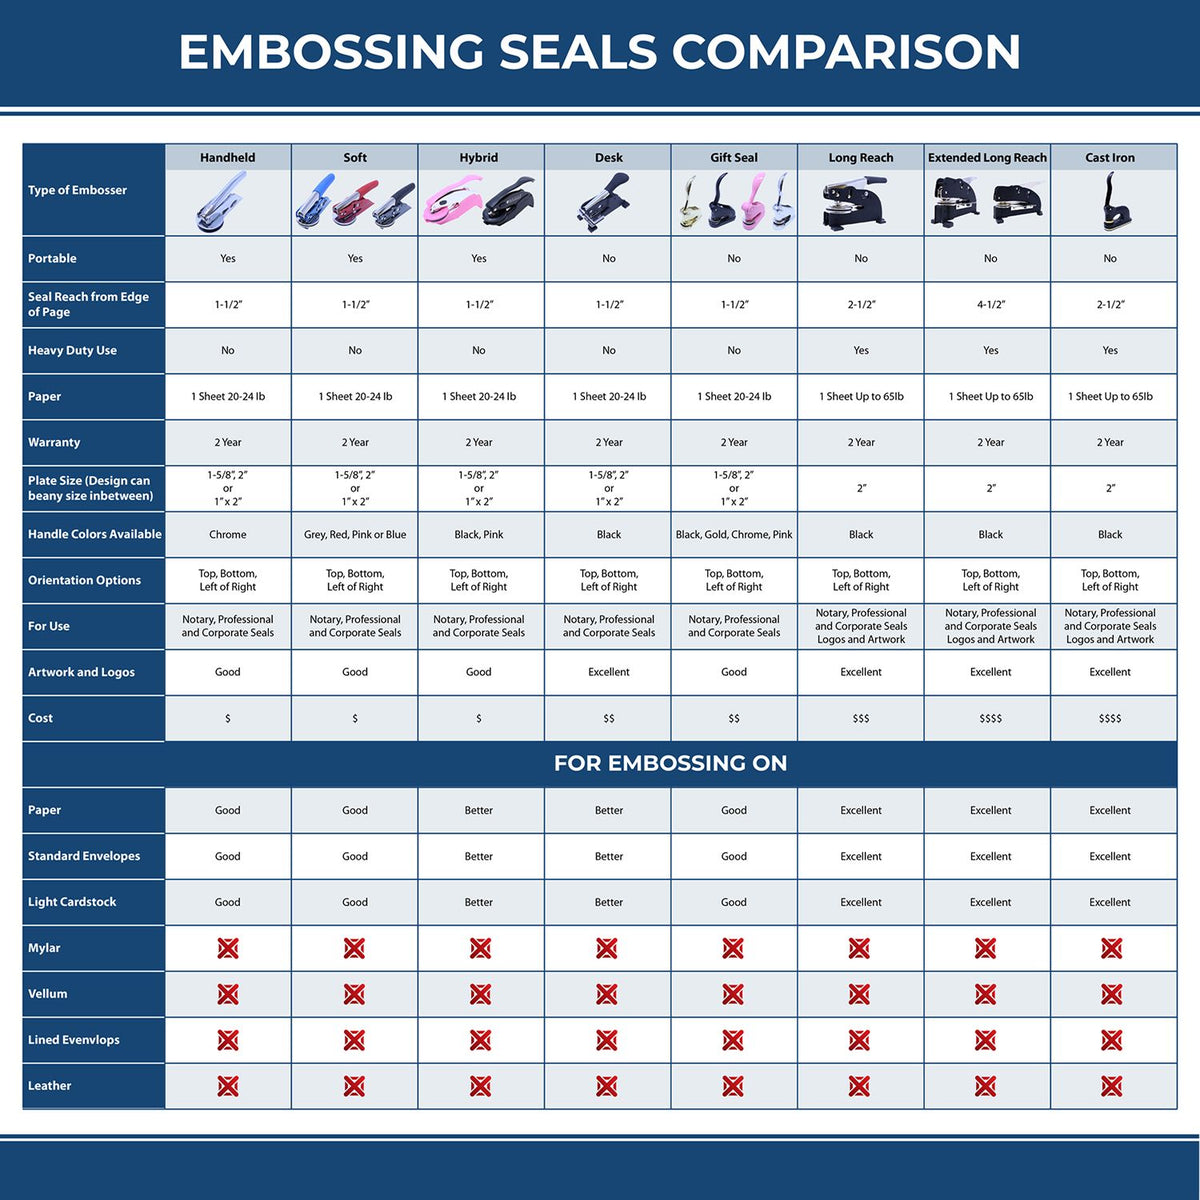 A comparison chart for the different types of mount models available for the Hybrid Louisiana Architect Seal